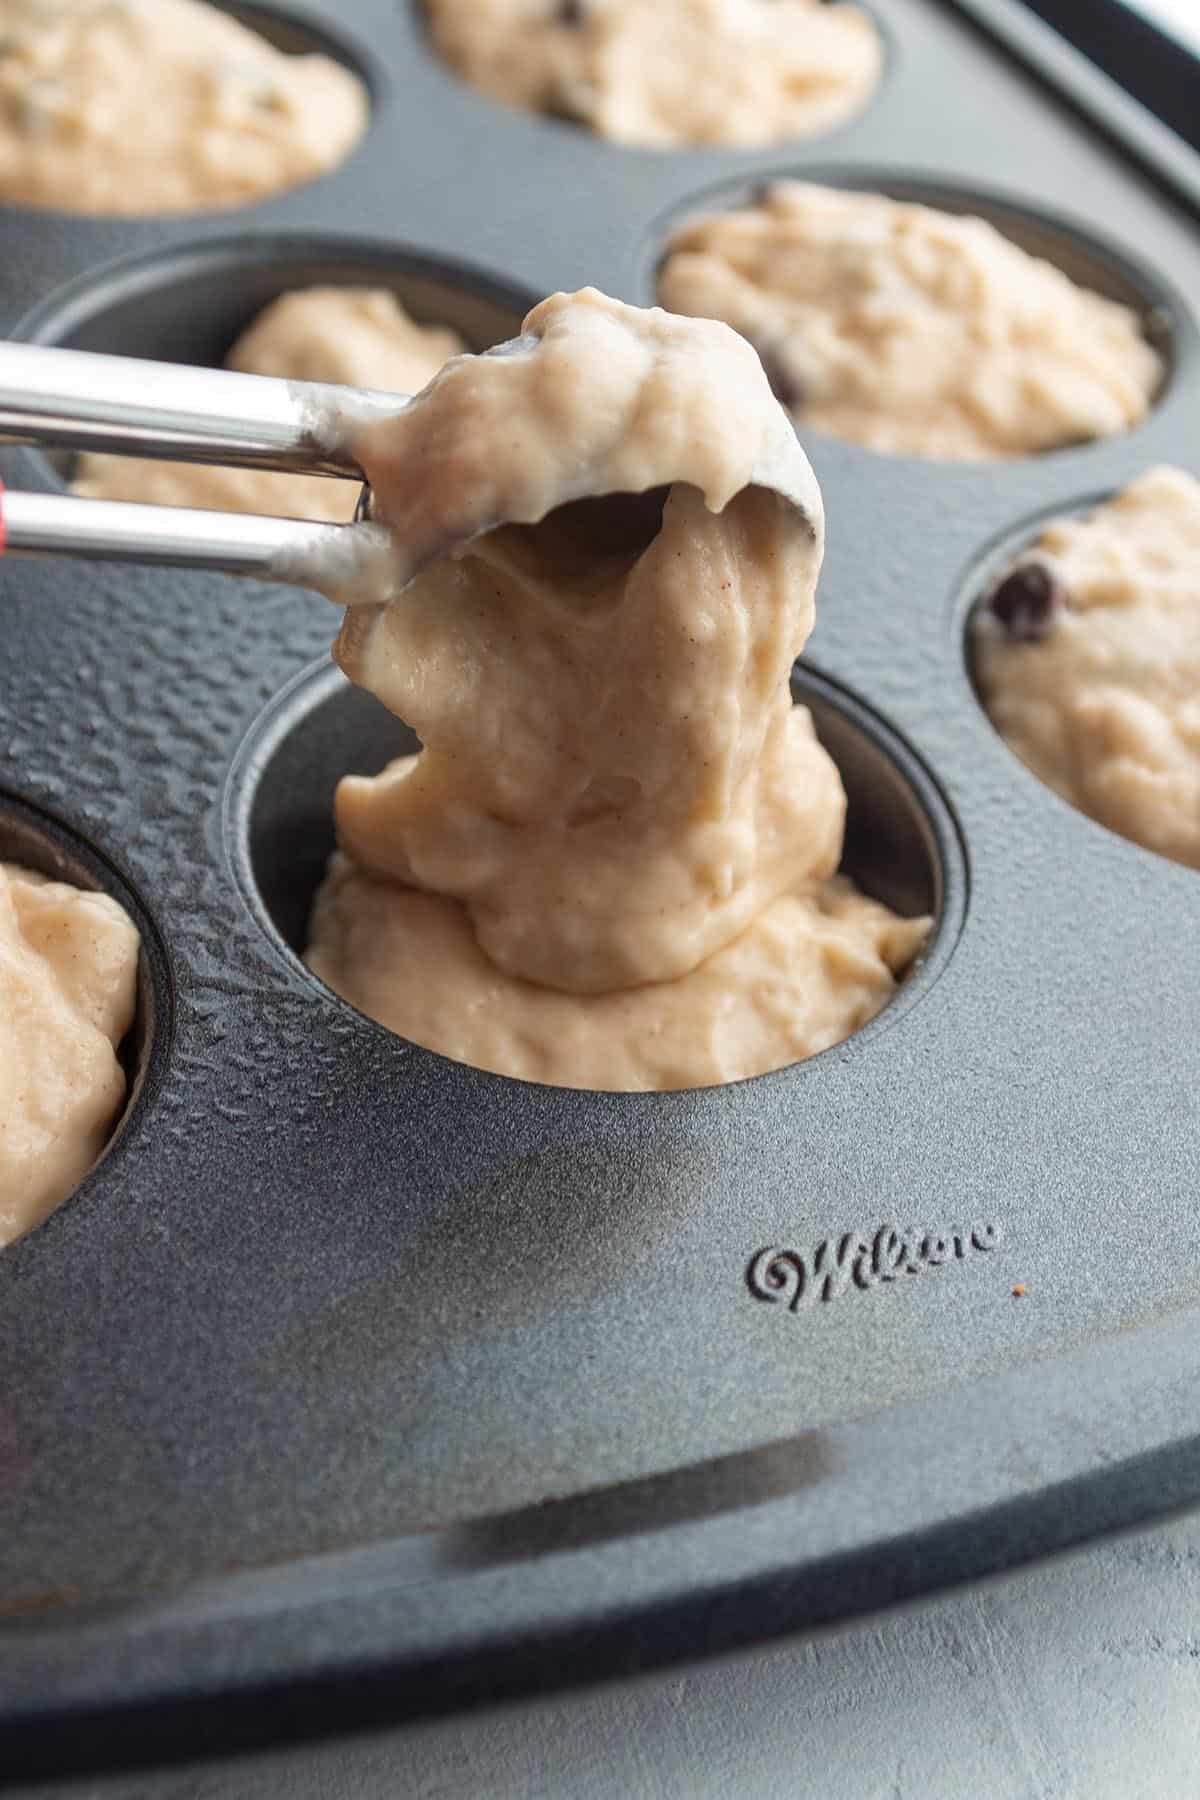 A cookie scoop dividing out muffin batter into a baking pan.